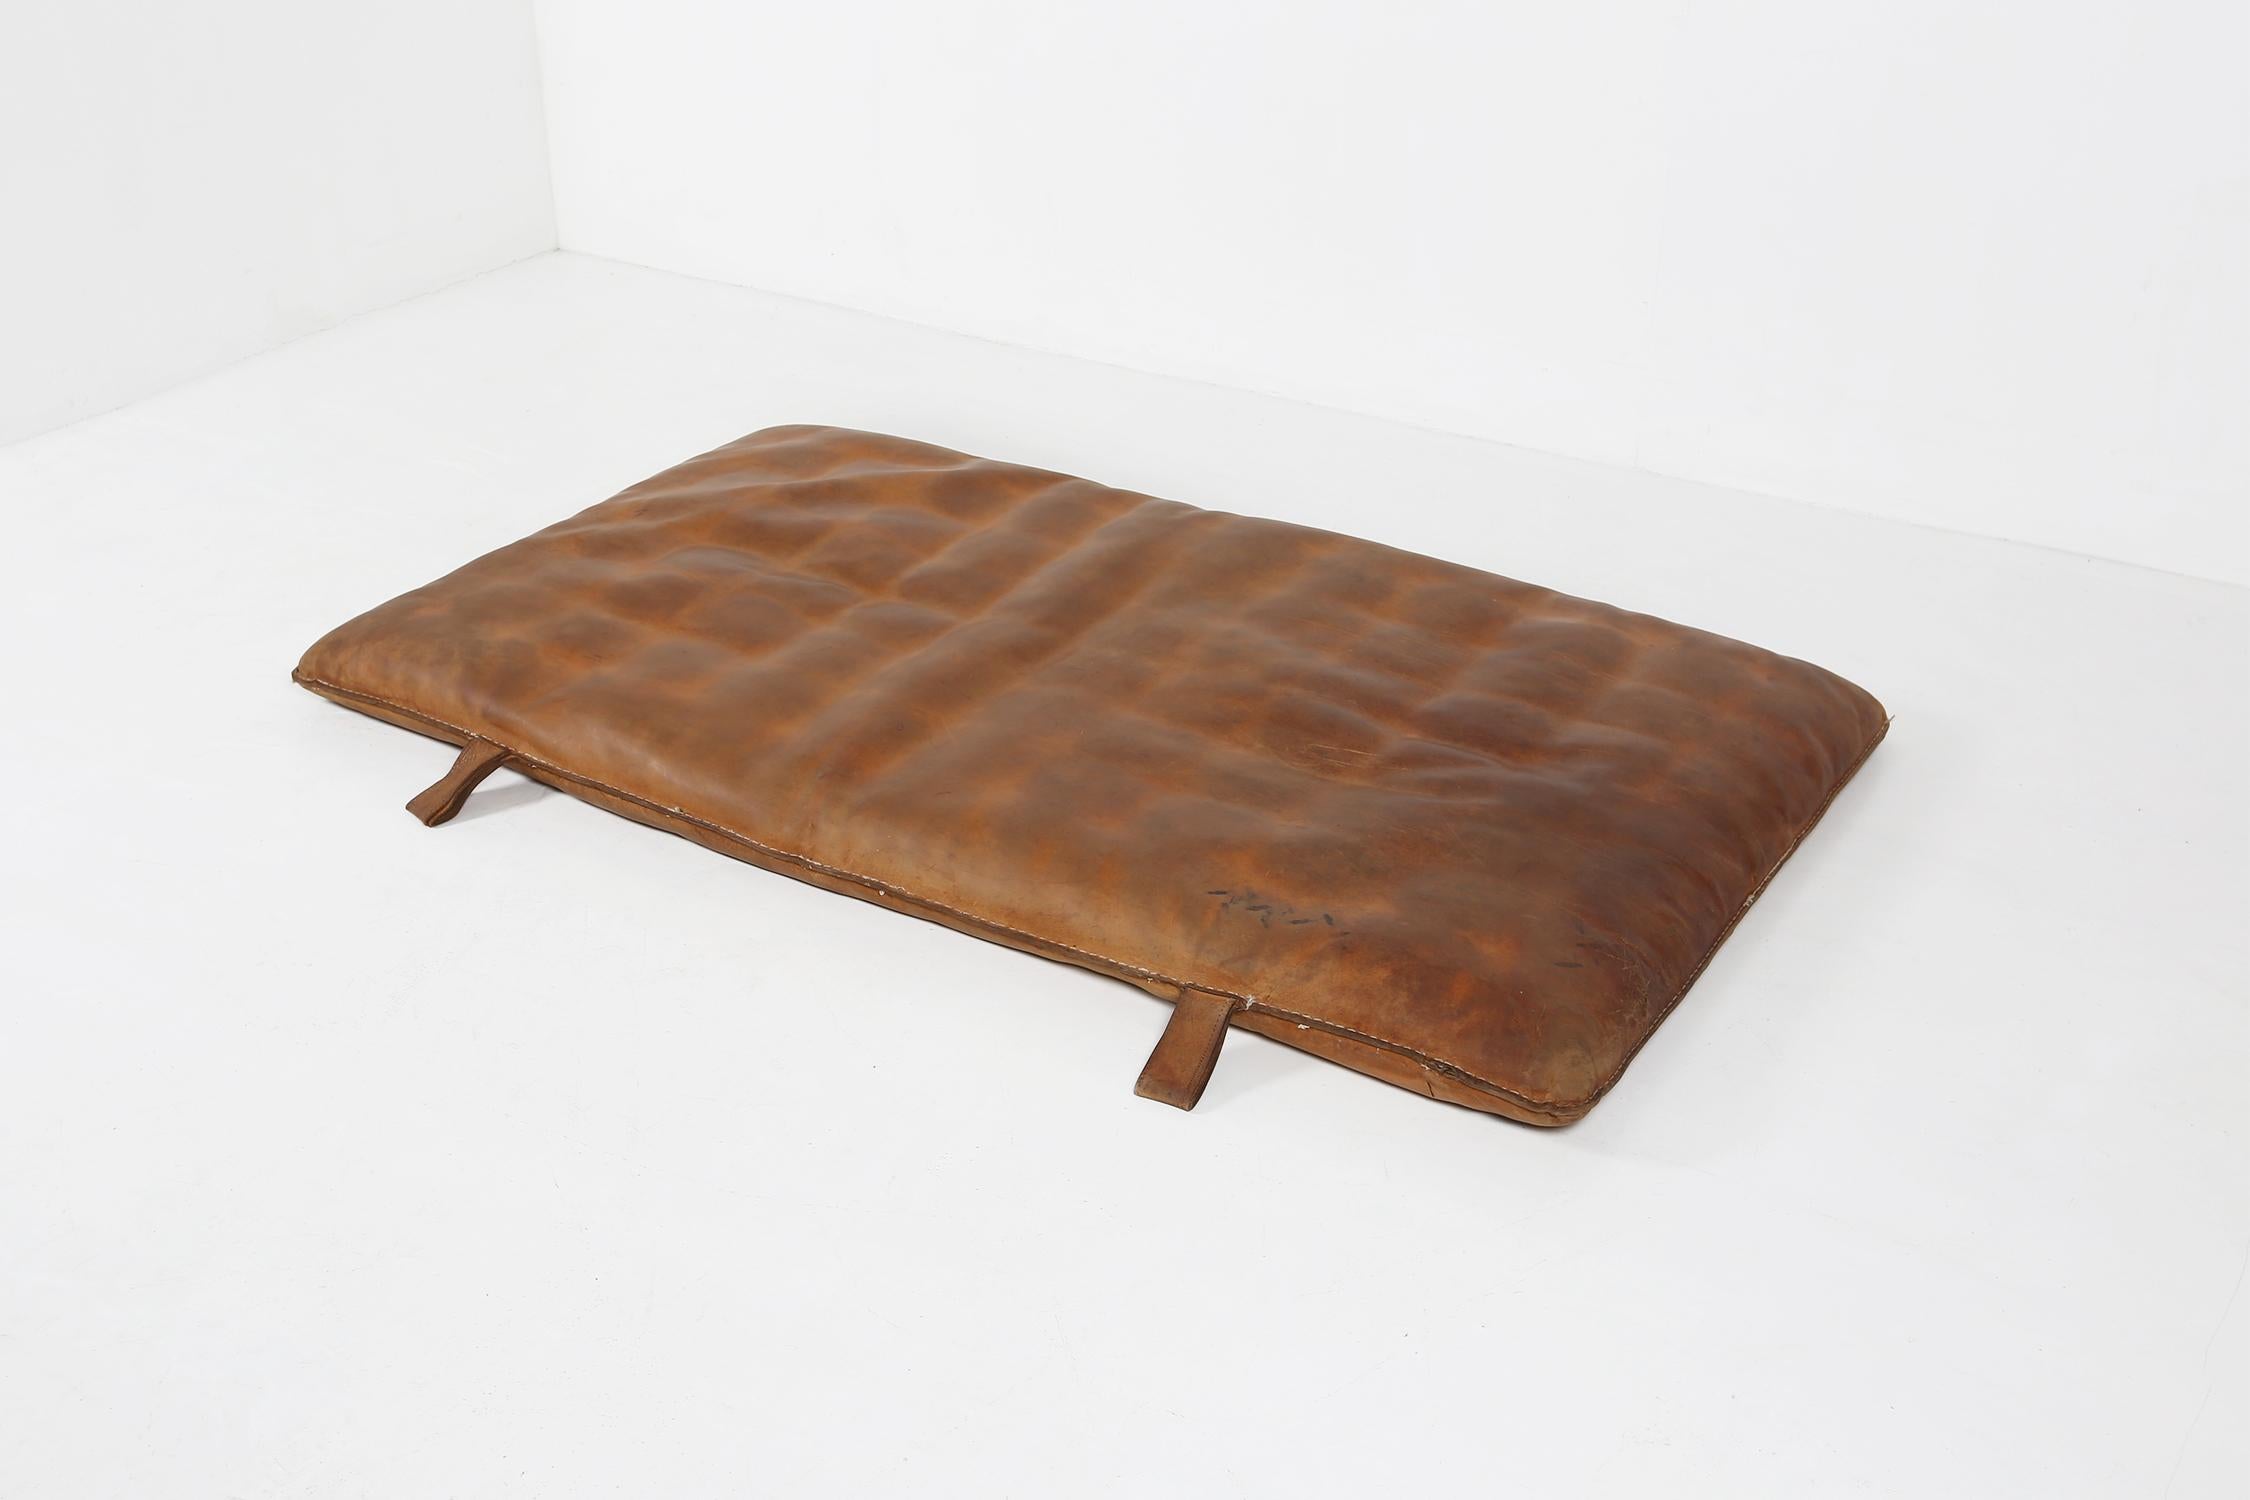 Leather gym mat ca.1930 Belgium.
Made from thick but soft leather.
With a very nice patina.